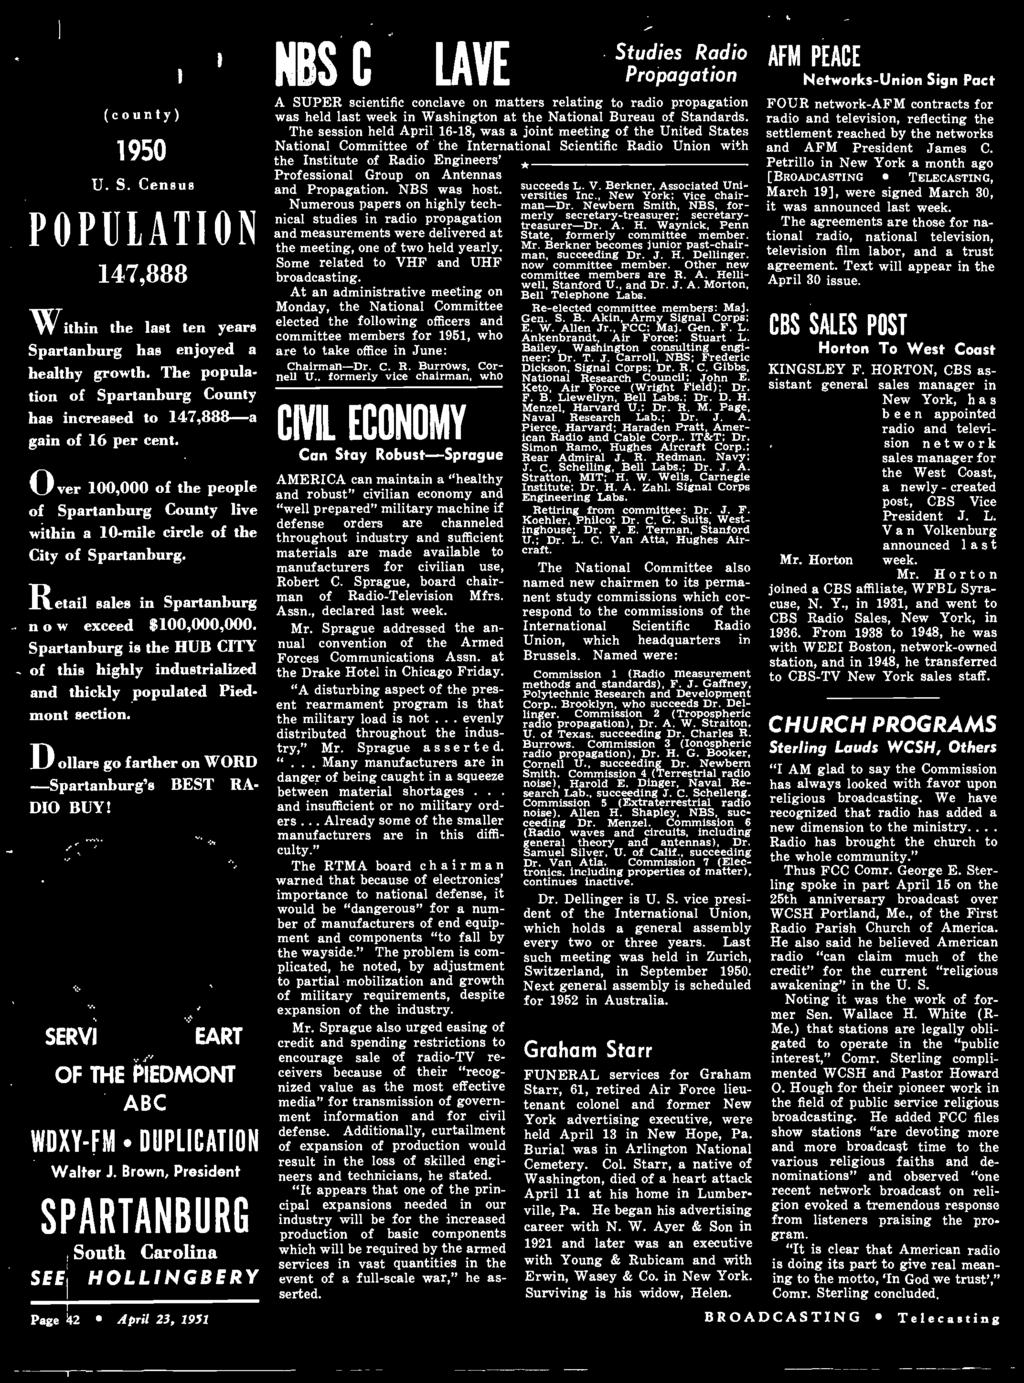 Brown, President SPARTANBURG SEE South Carolina HOLLINGBERY Page 42 April 23, 1951 NBS CONCLAVE Studies Radio Propagation A SUPER scientific conclave on matters relating to radio propagation was held